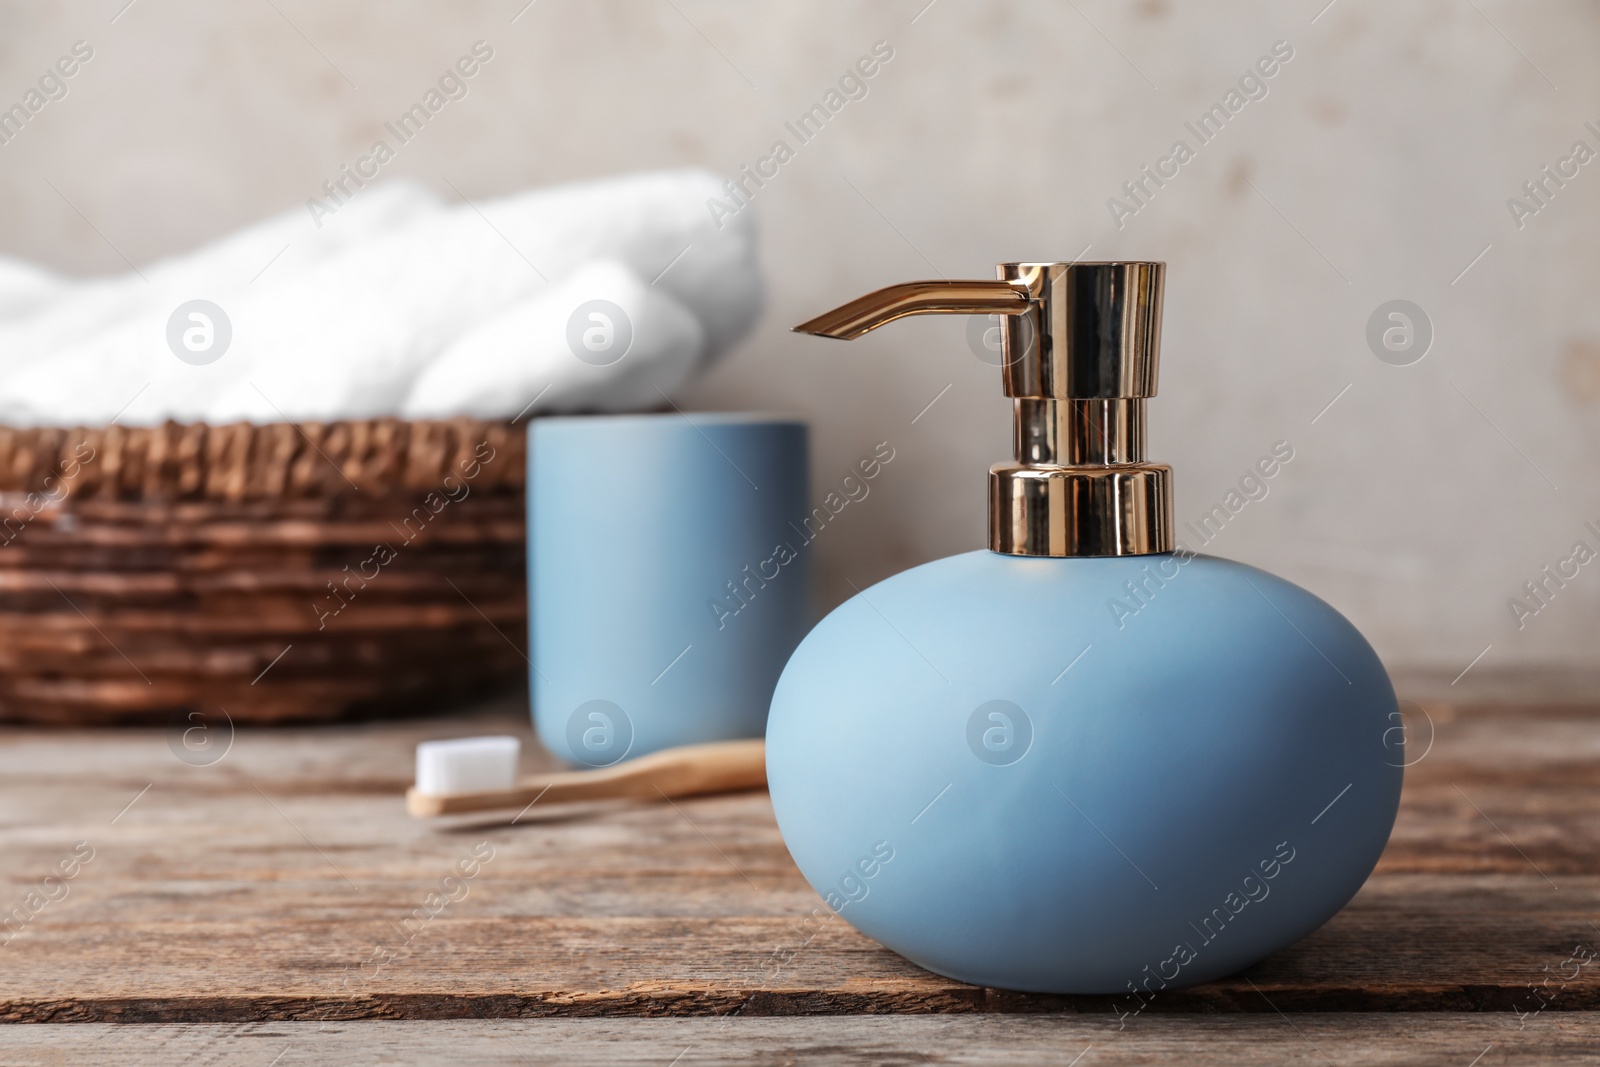 Photo of New stylish soap dispenser on table. Space for text